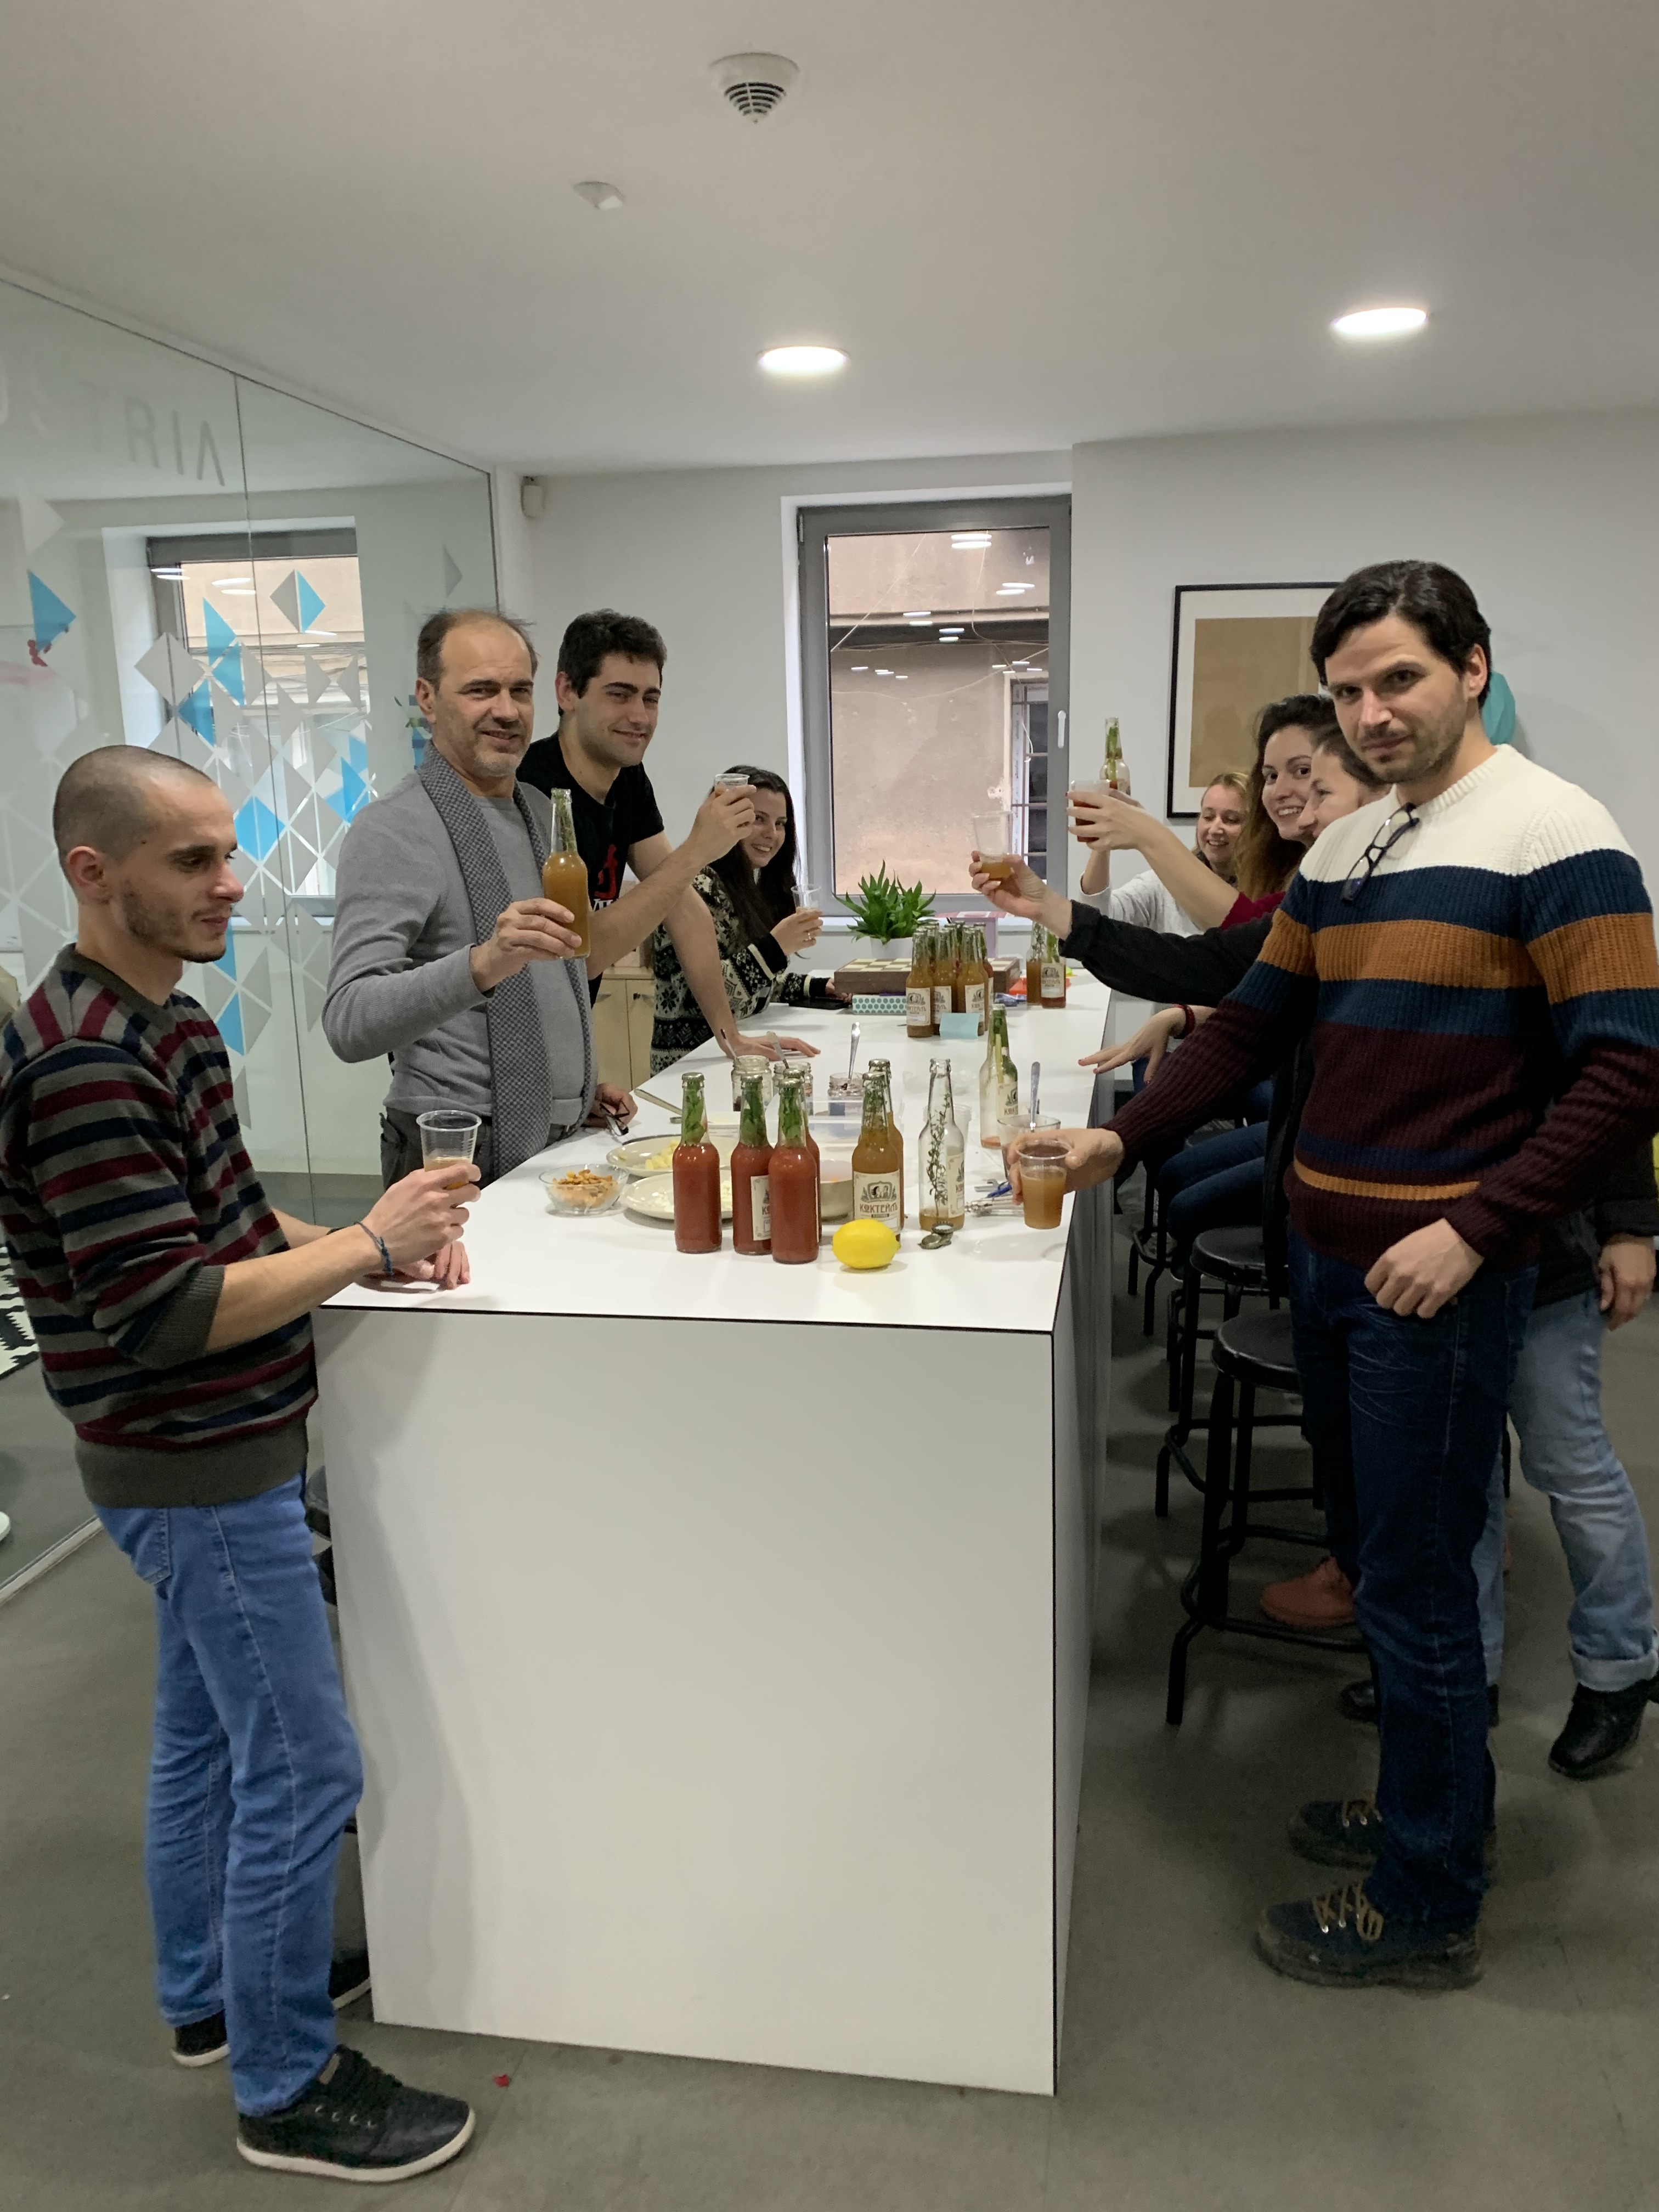 One of Nino’s passions is making cocktails. Therefore we are extremely happy when he visits the office, because he never misses to surprise us with his tasty drinks.